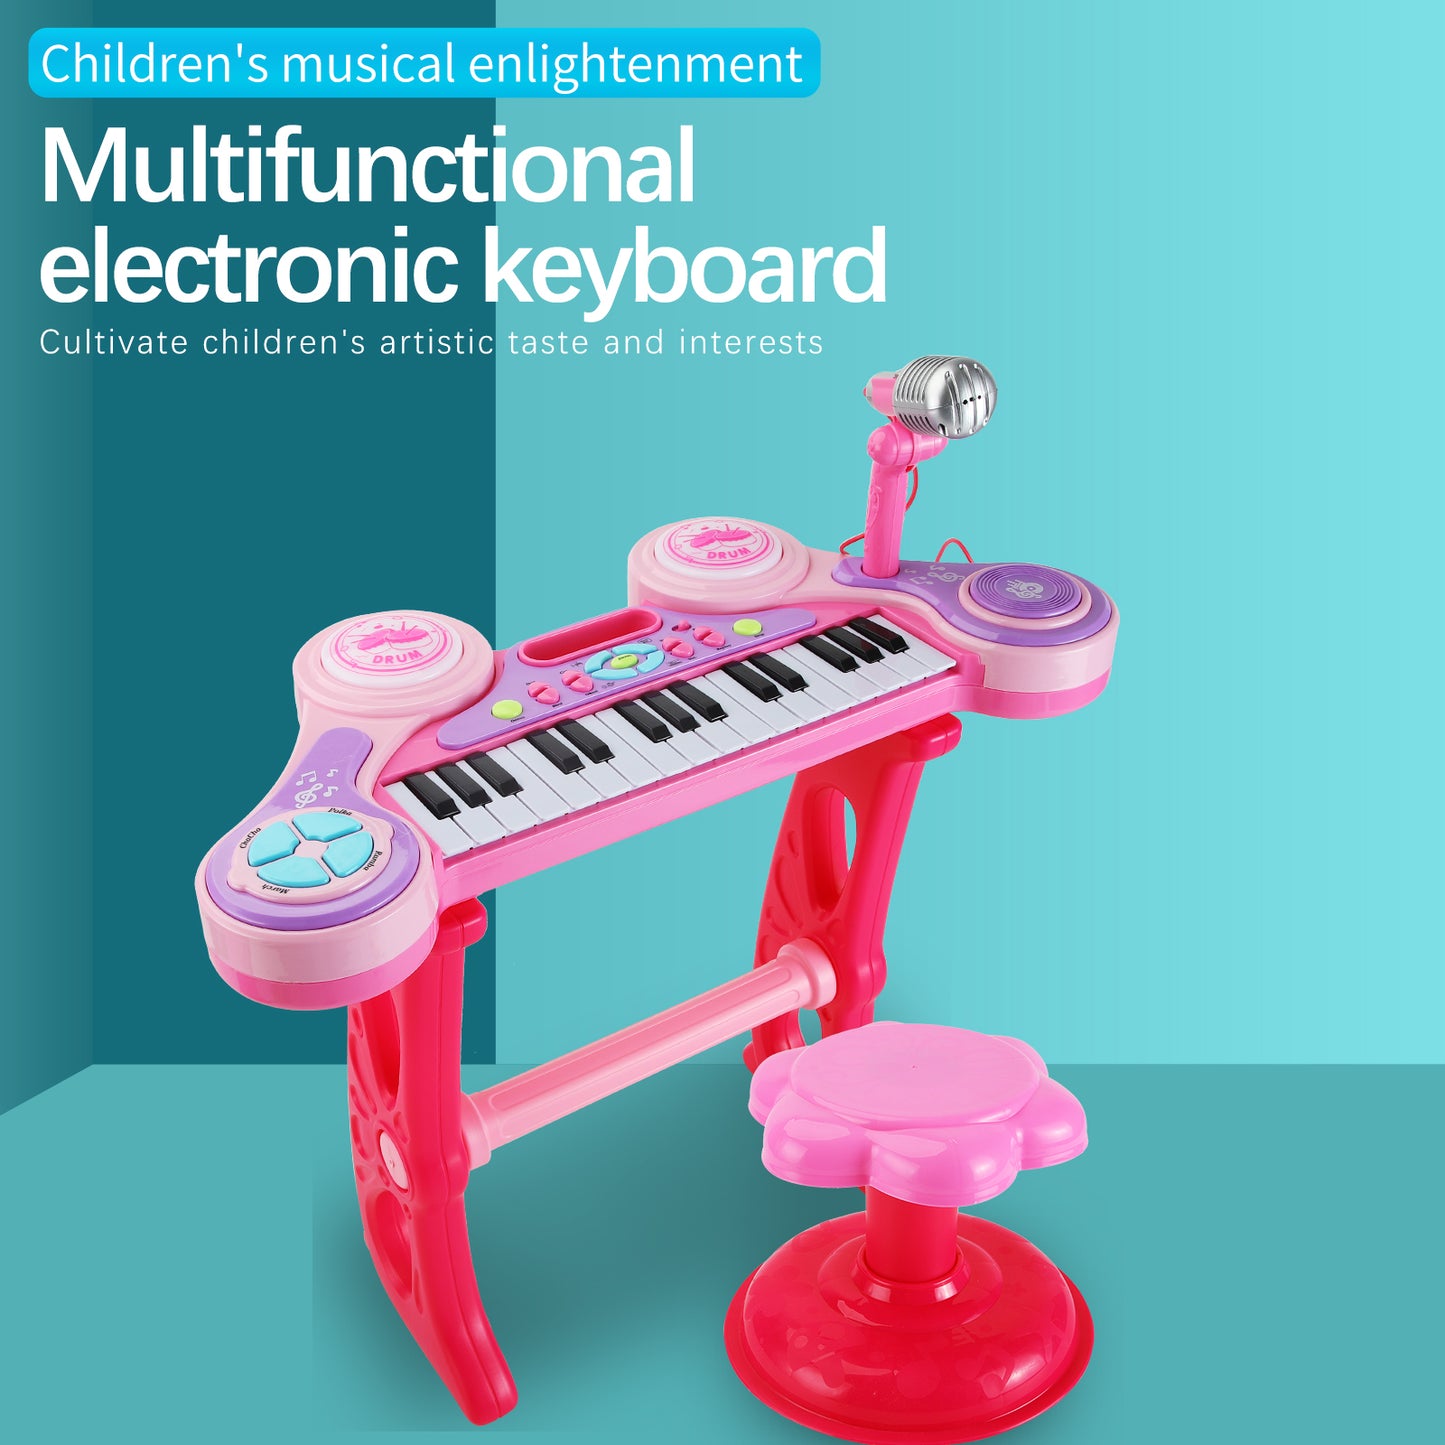 AOQIMITENJOY Musical Instrument Electronic 31 Keys Keyboard Toys with Bracket LED Lighting Children's Toys Birthday Gifts for Boys and Girls 3 Year Old+ HK-3012C